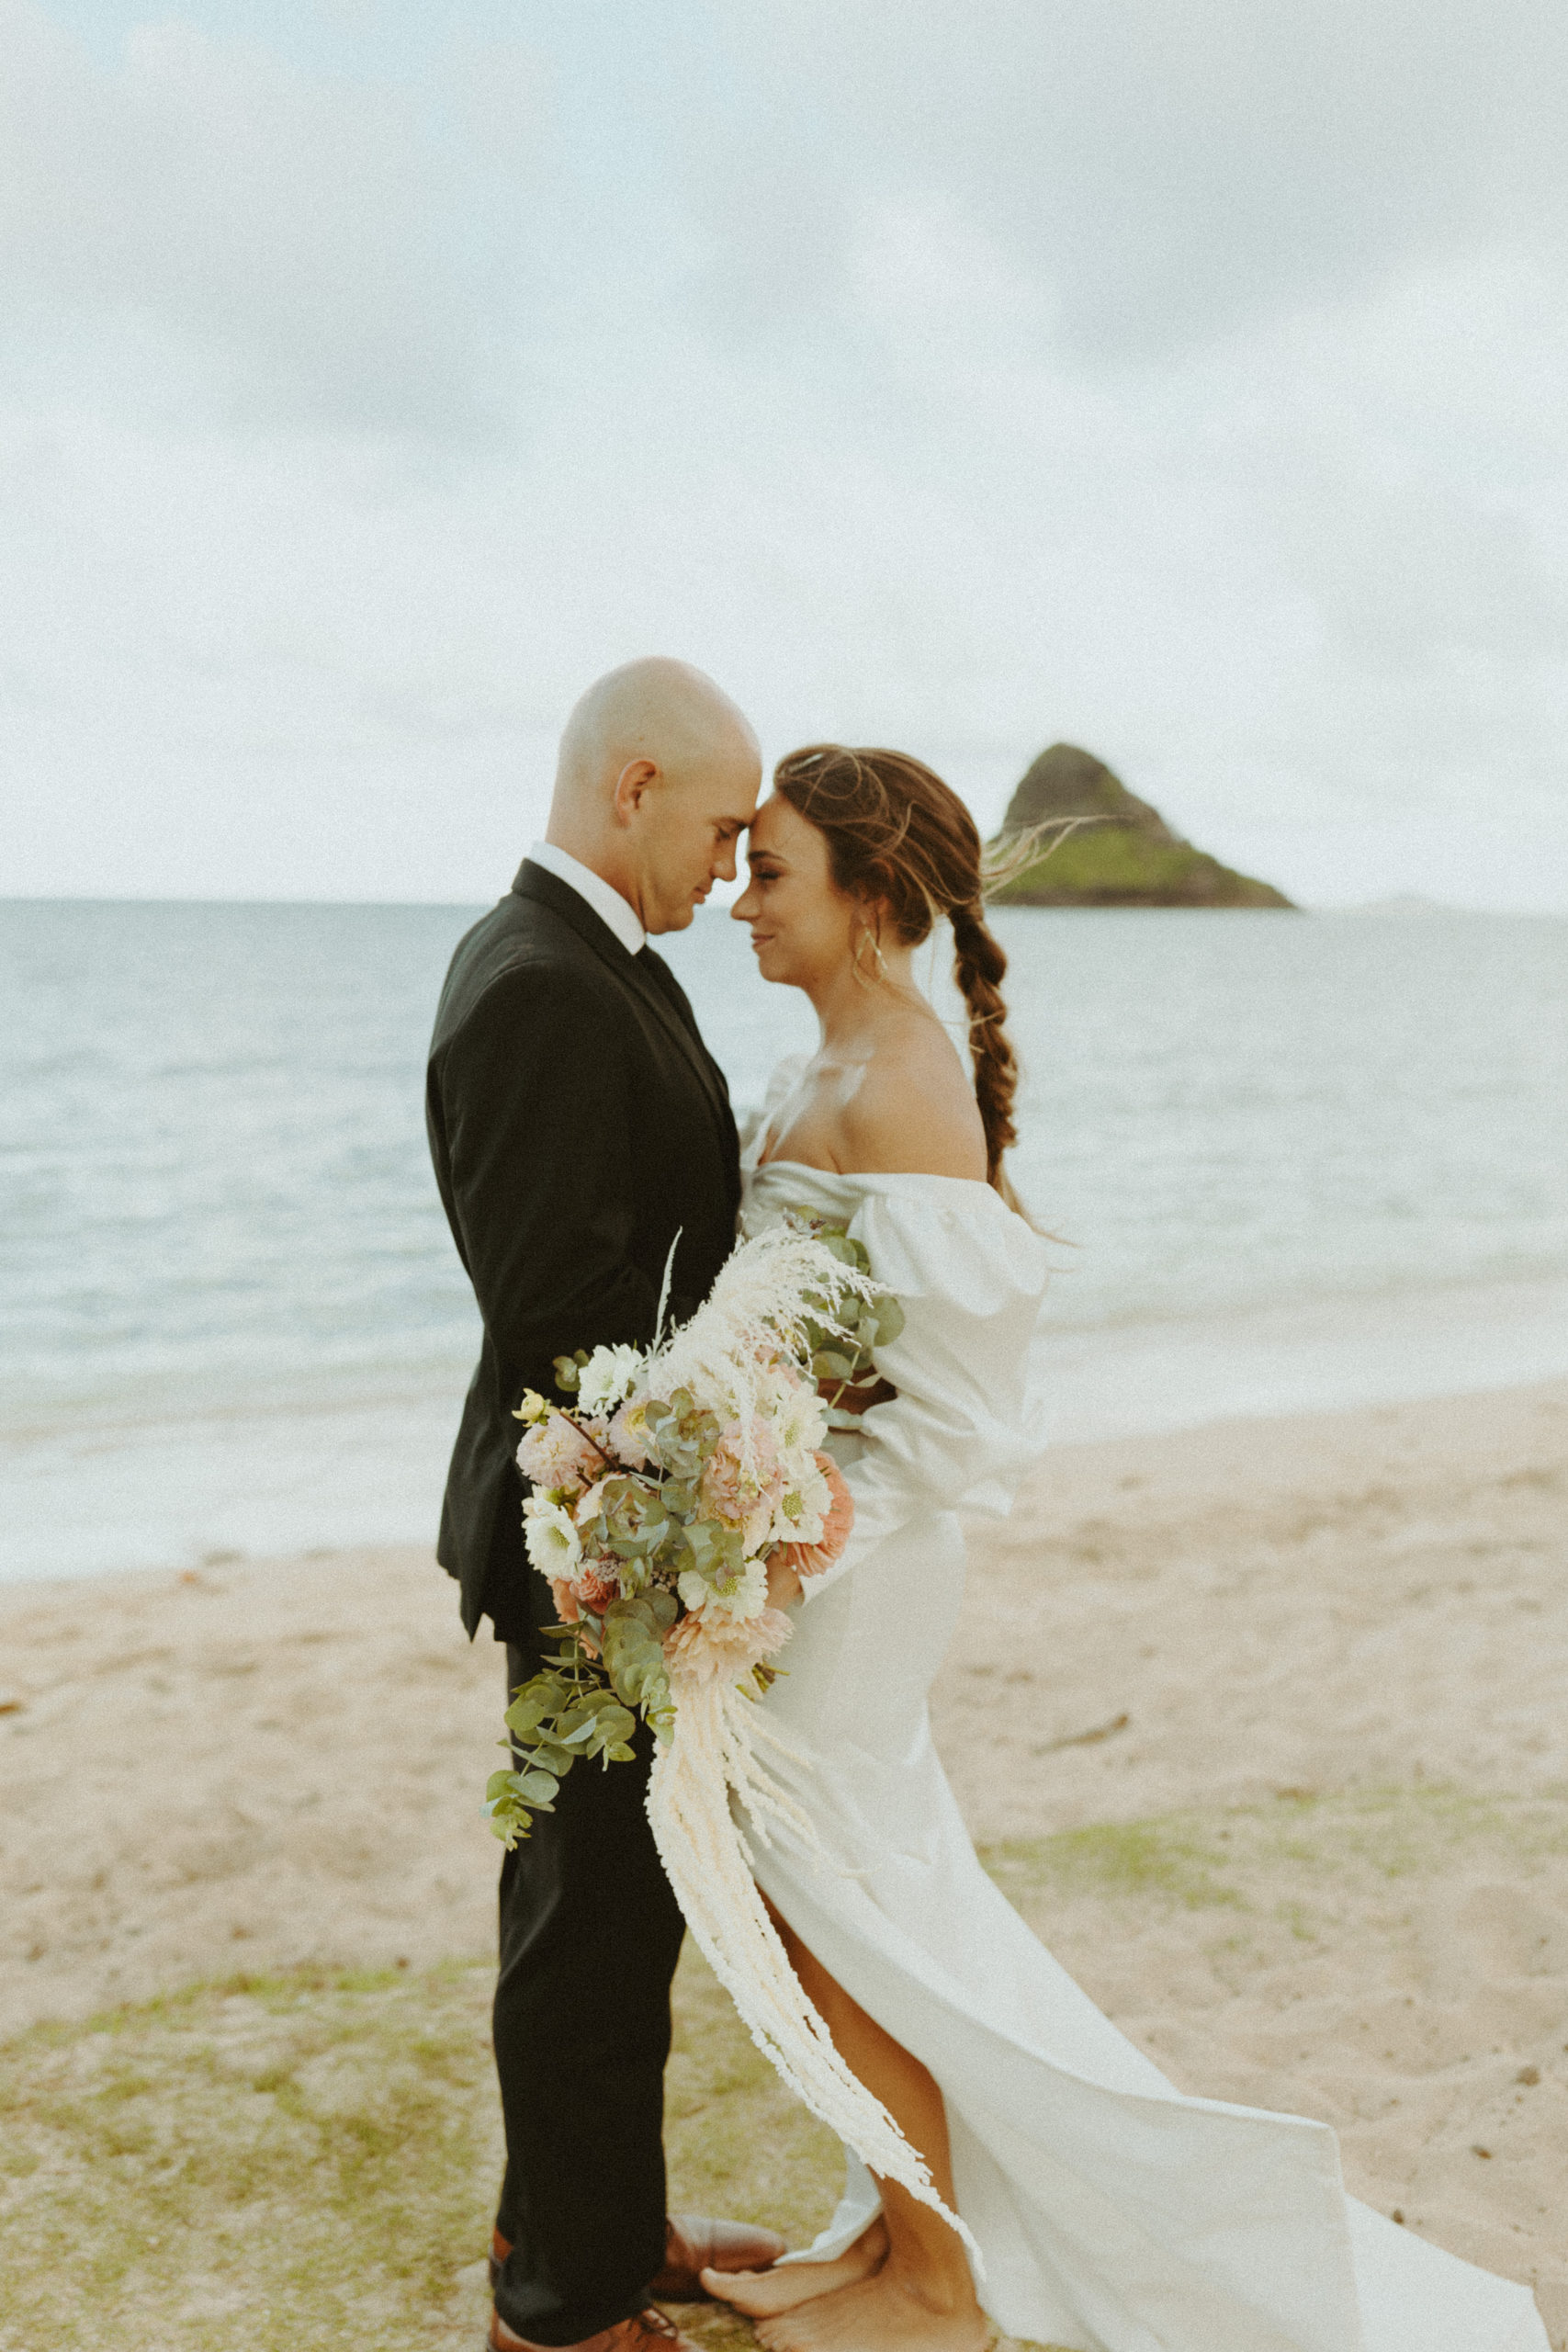 the couple looking into one another's eyes at the Kualoa Ranch in Oahu